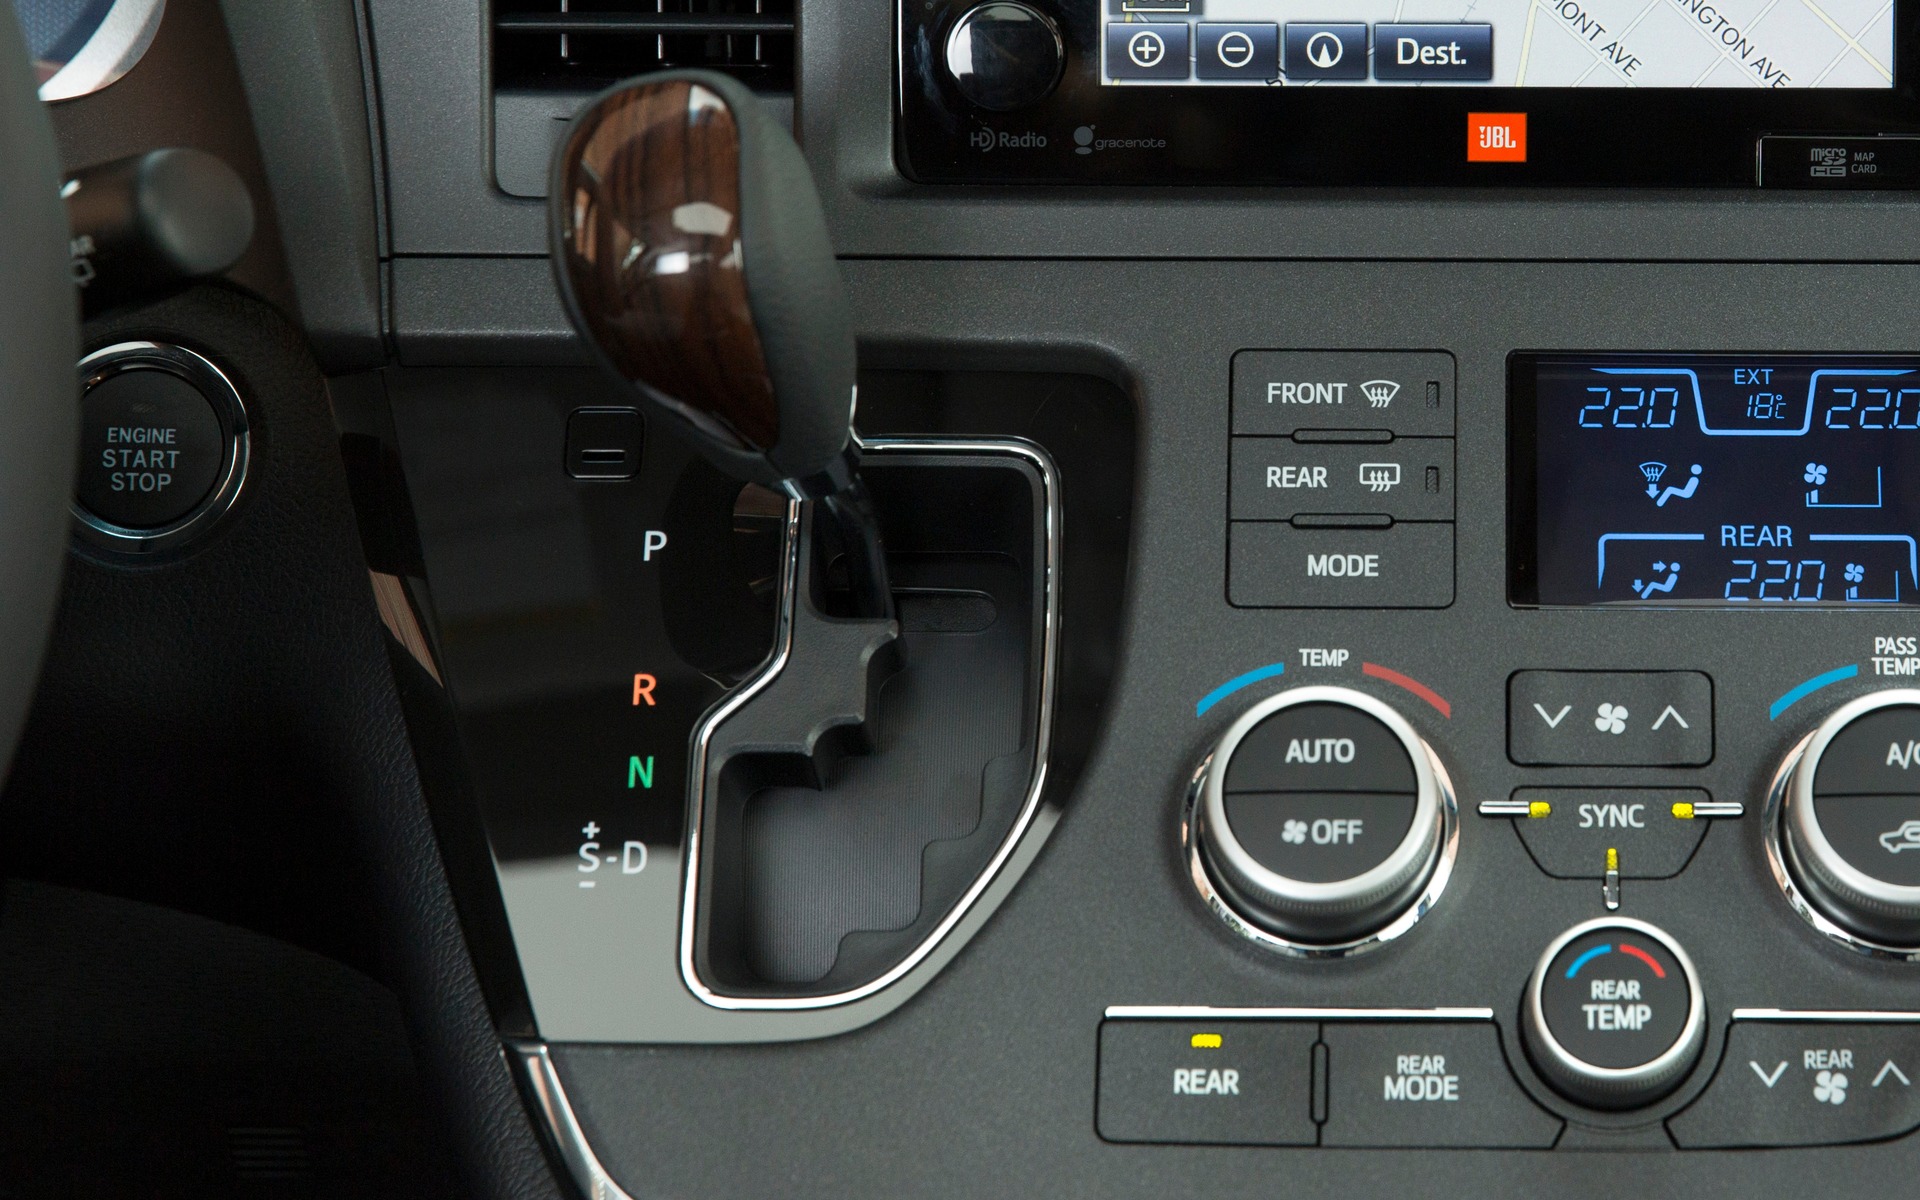 The gear shift lever is within easy reach.